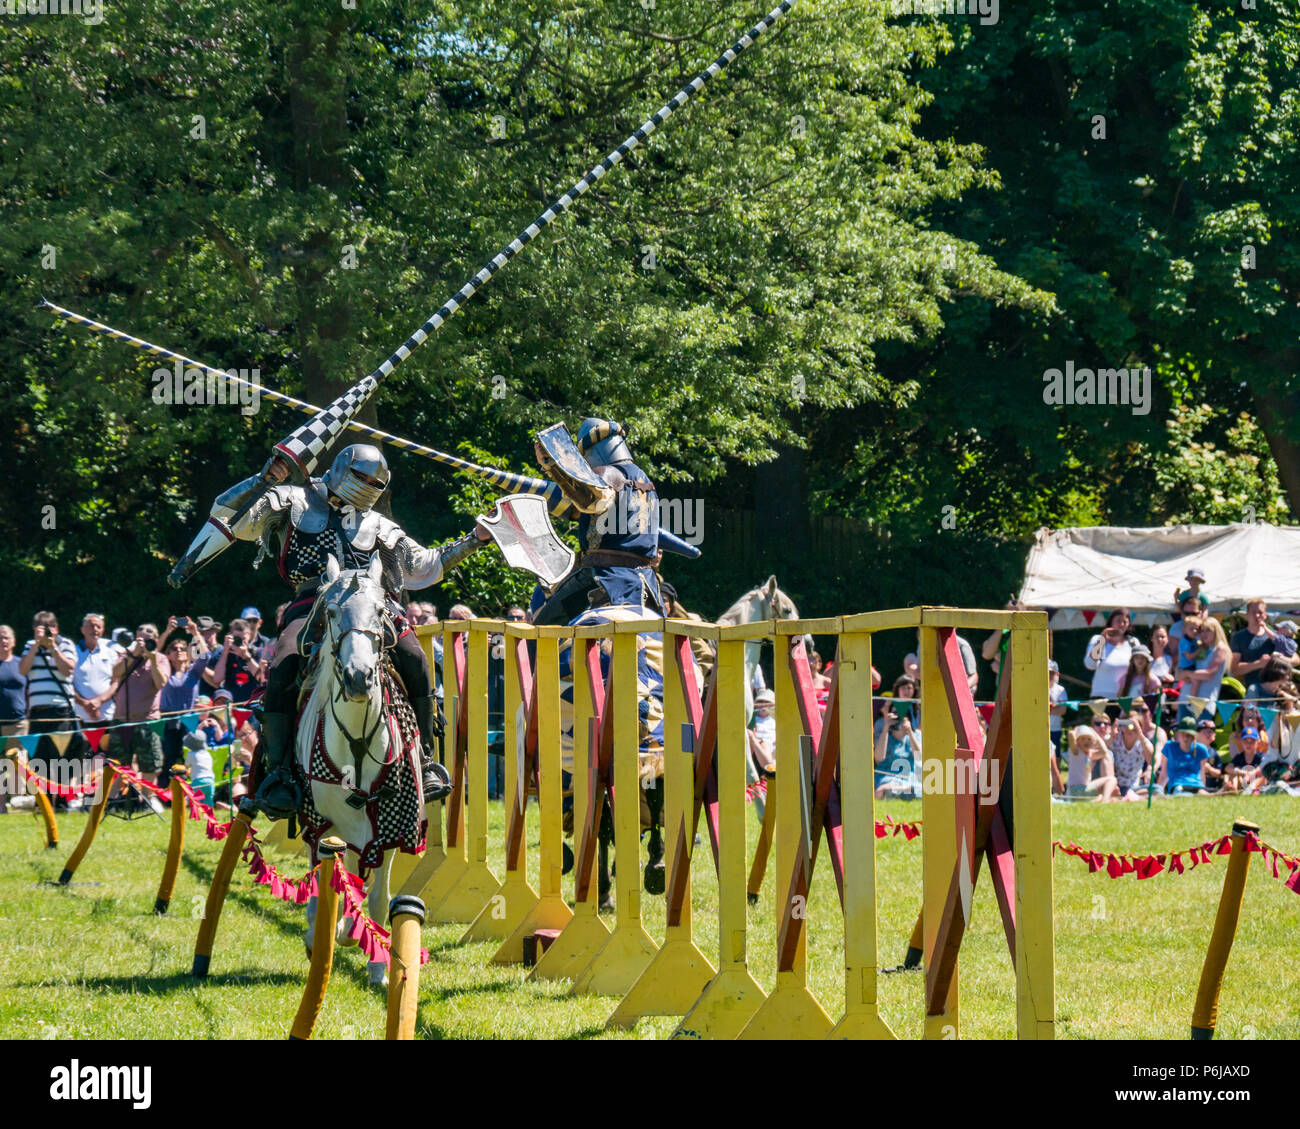 Jousting and Medieval Fair at Linlithgow Palace, Linlithgow, Scotland, United Kingdom, 30th June 2018. Historic Environment Scotland kick off their summer entertainment programme with a fabulous display of Medieval jousting in the grounds of the historic castle The jousting is performed by Les Amis D'Onno equine stunt team. Knights joust with lances Stock Photo